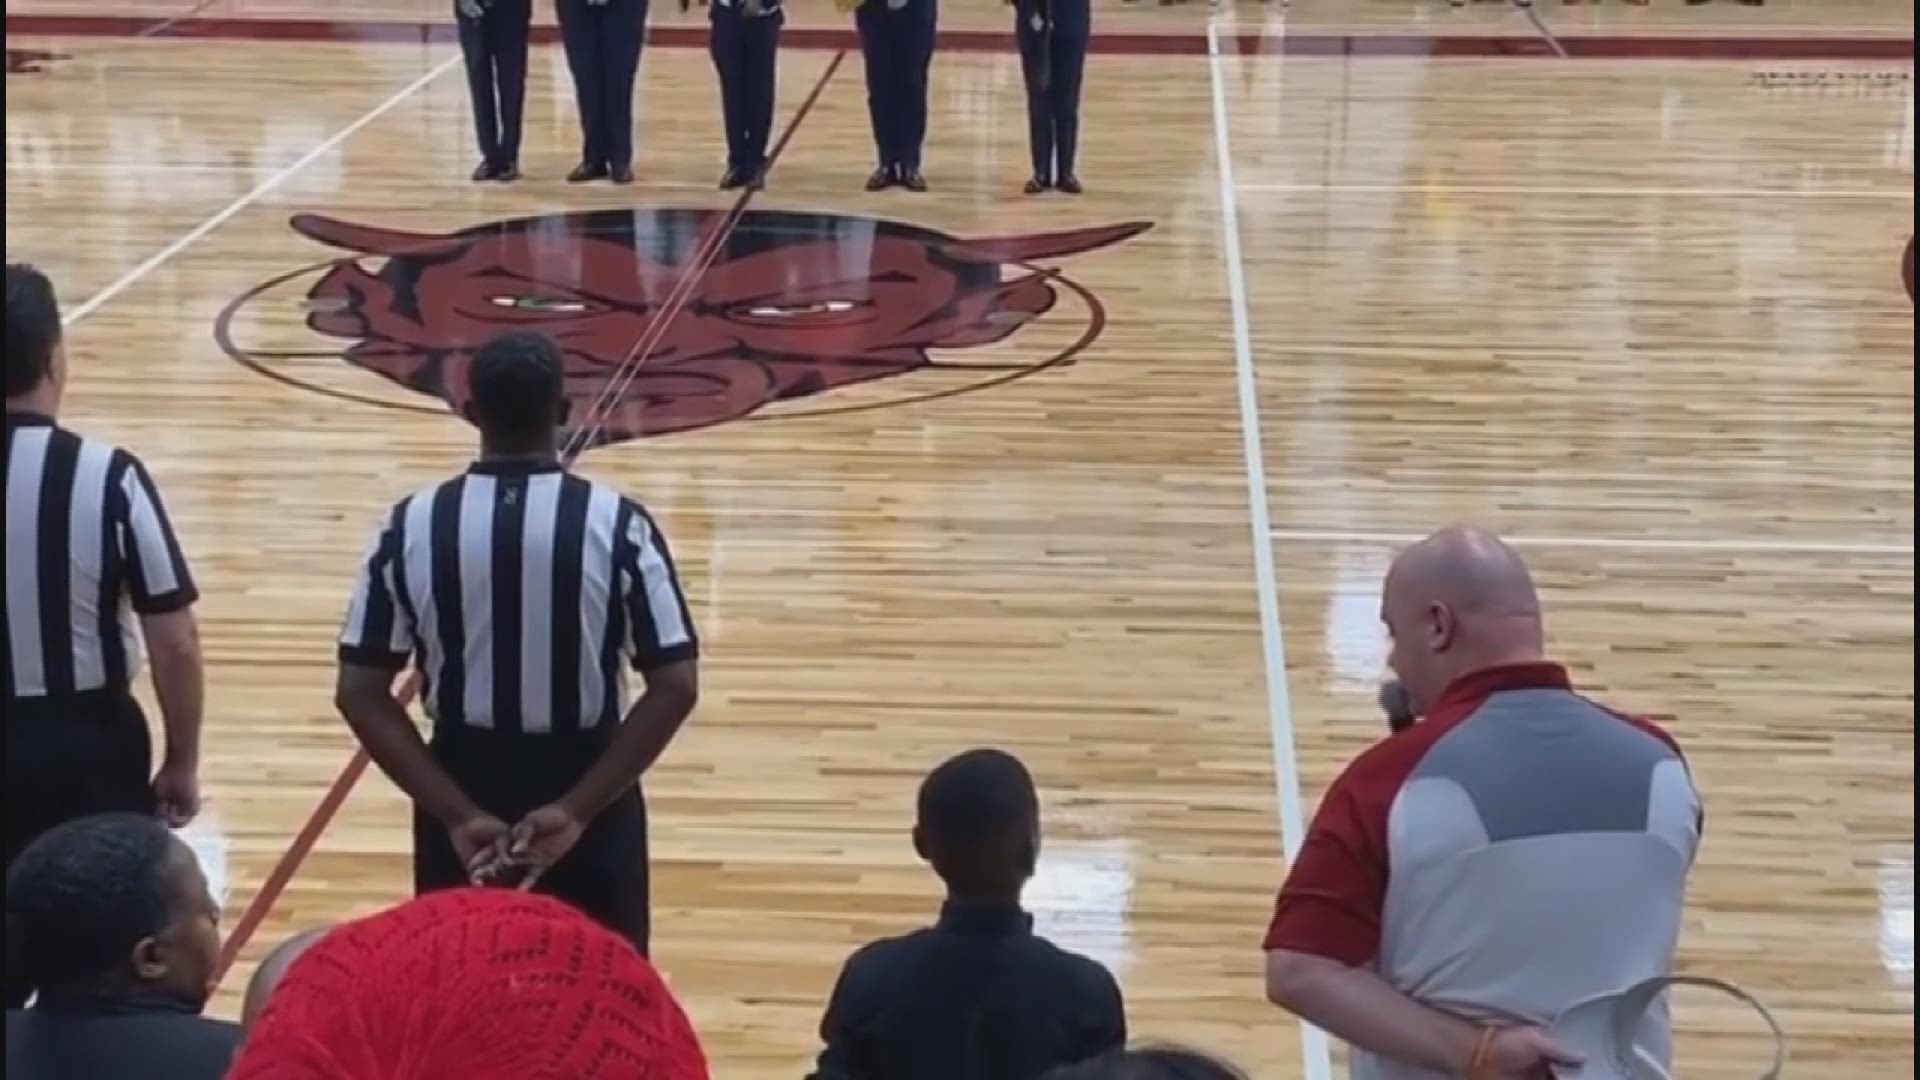 Junior Journalist Joshua Ratchford, Jr. sang that national anthem Friday at a Warner Robins basketball game--and he killed it!